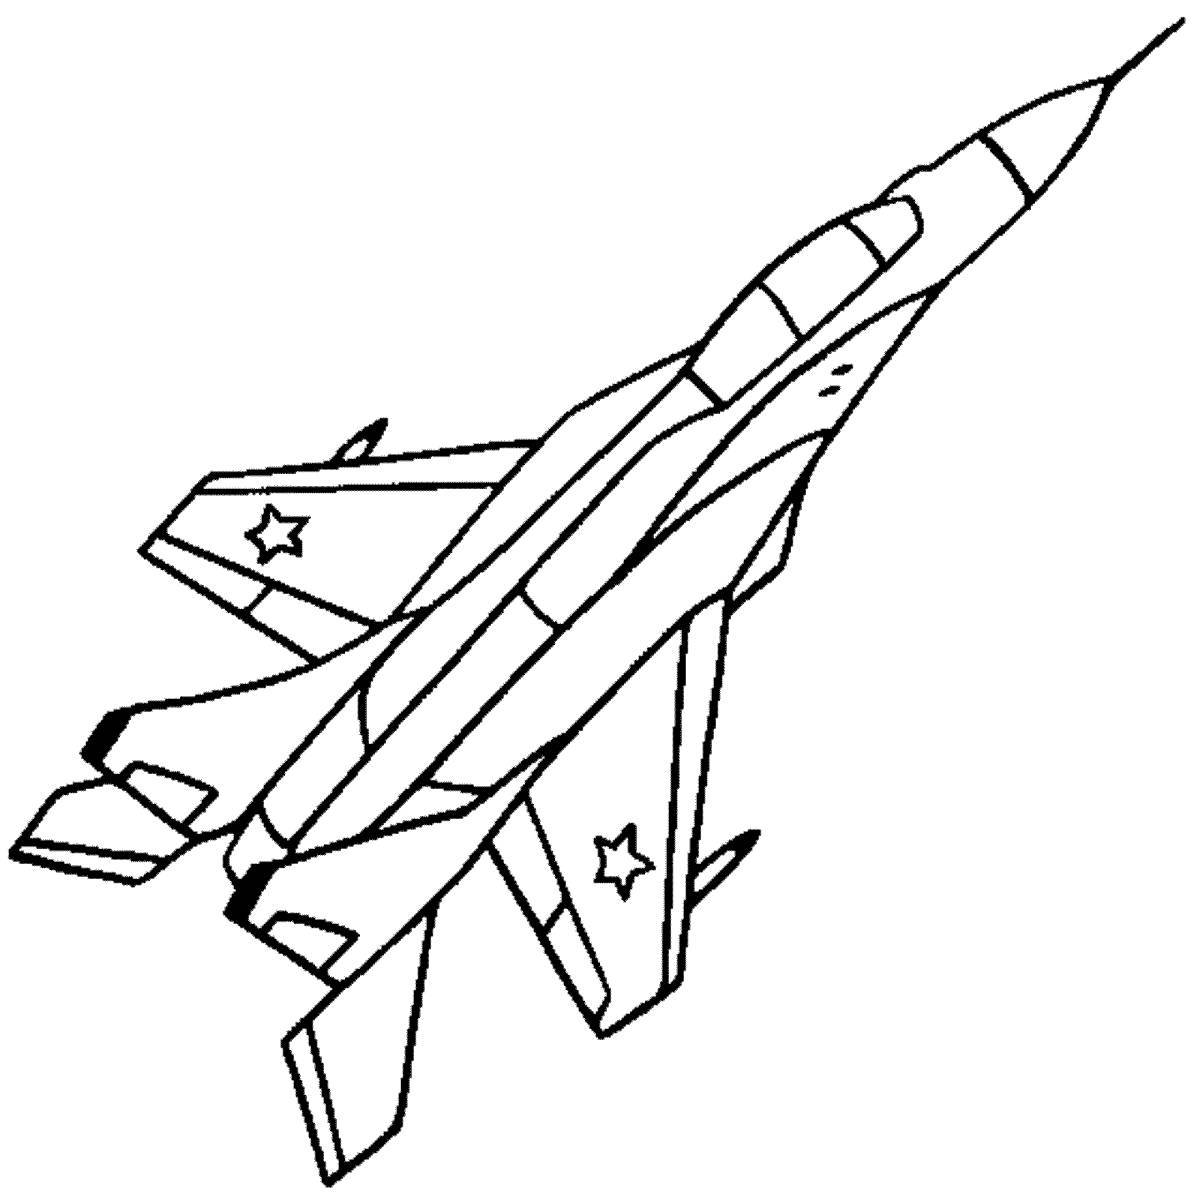 Incredible military aircraft coloring book for kids